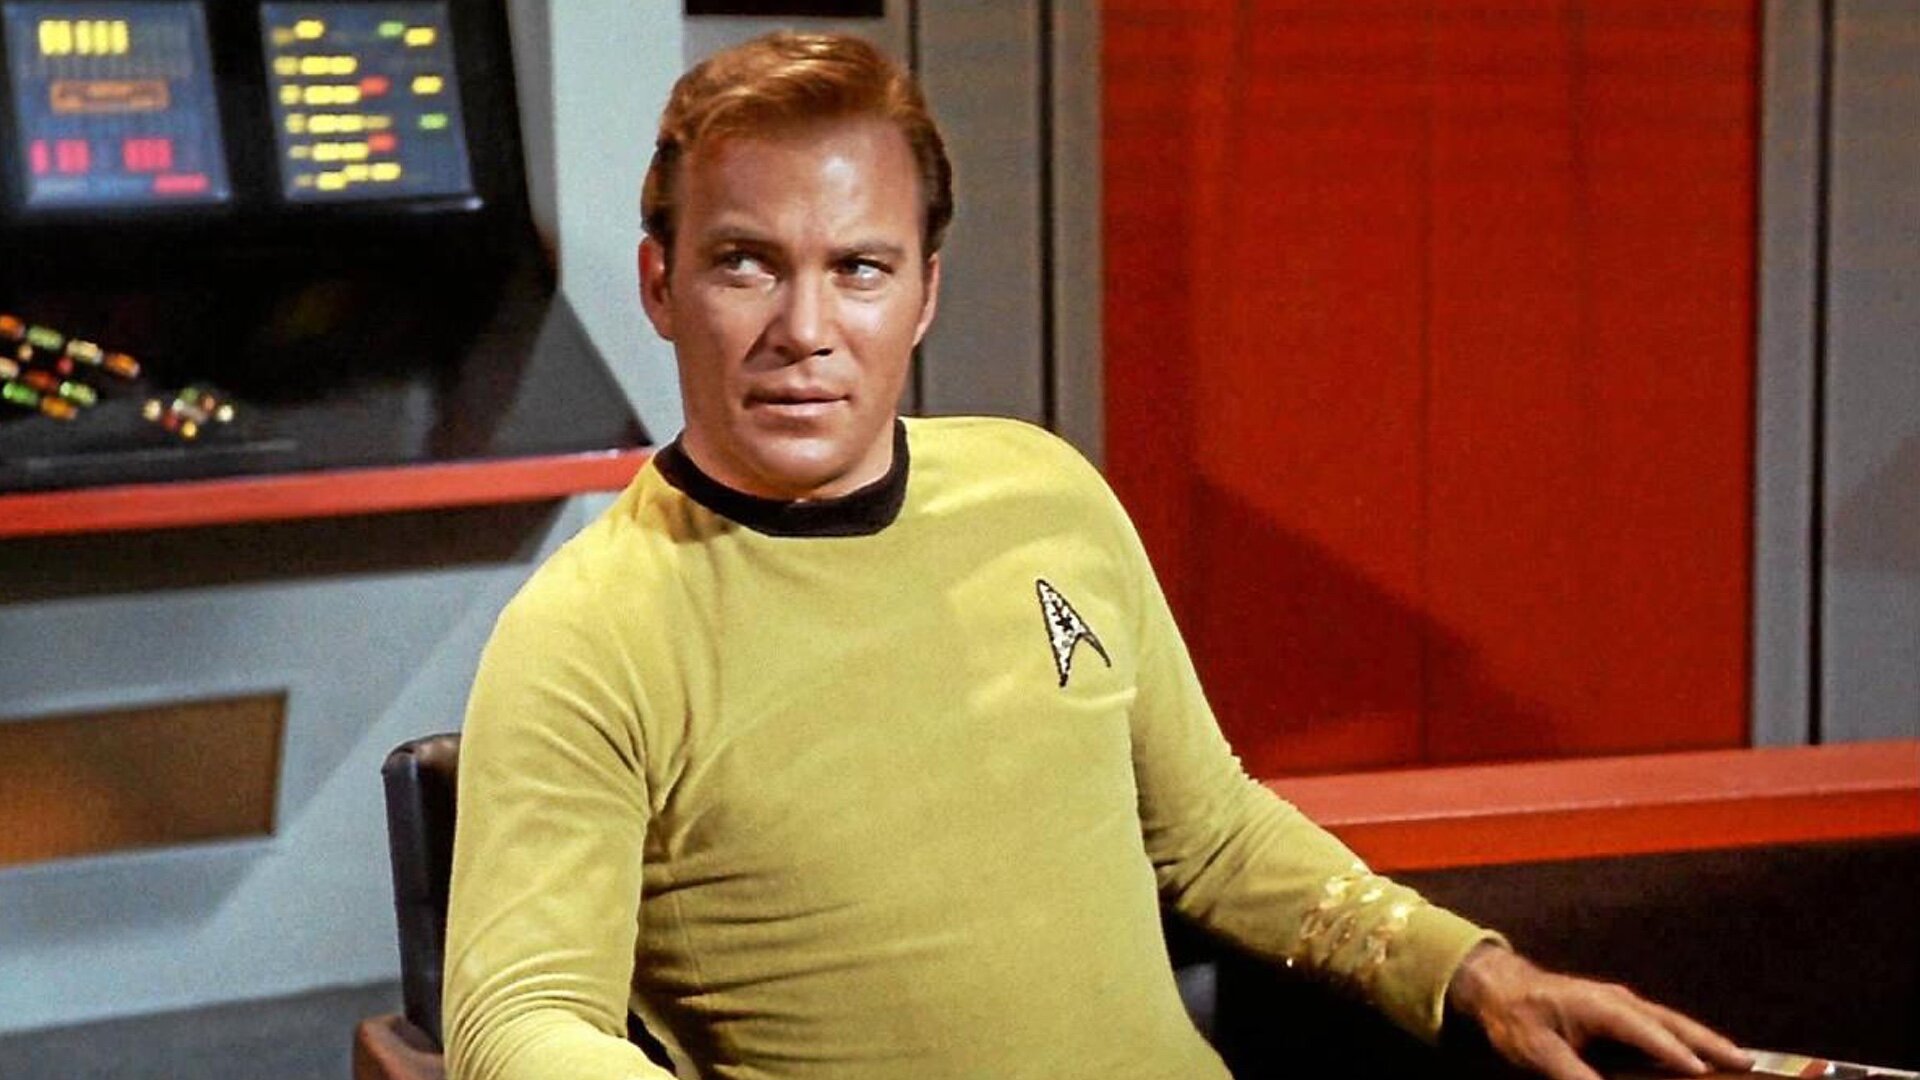 william-shatner-revels-hes-never-watched-star-trek-except-for-the-film-he-directed.jpg